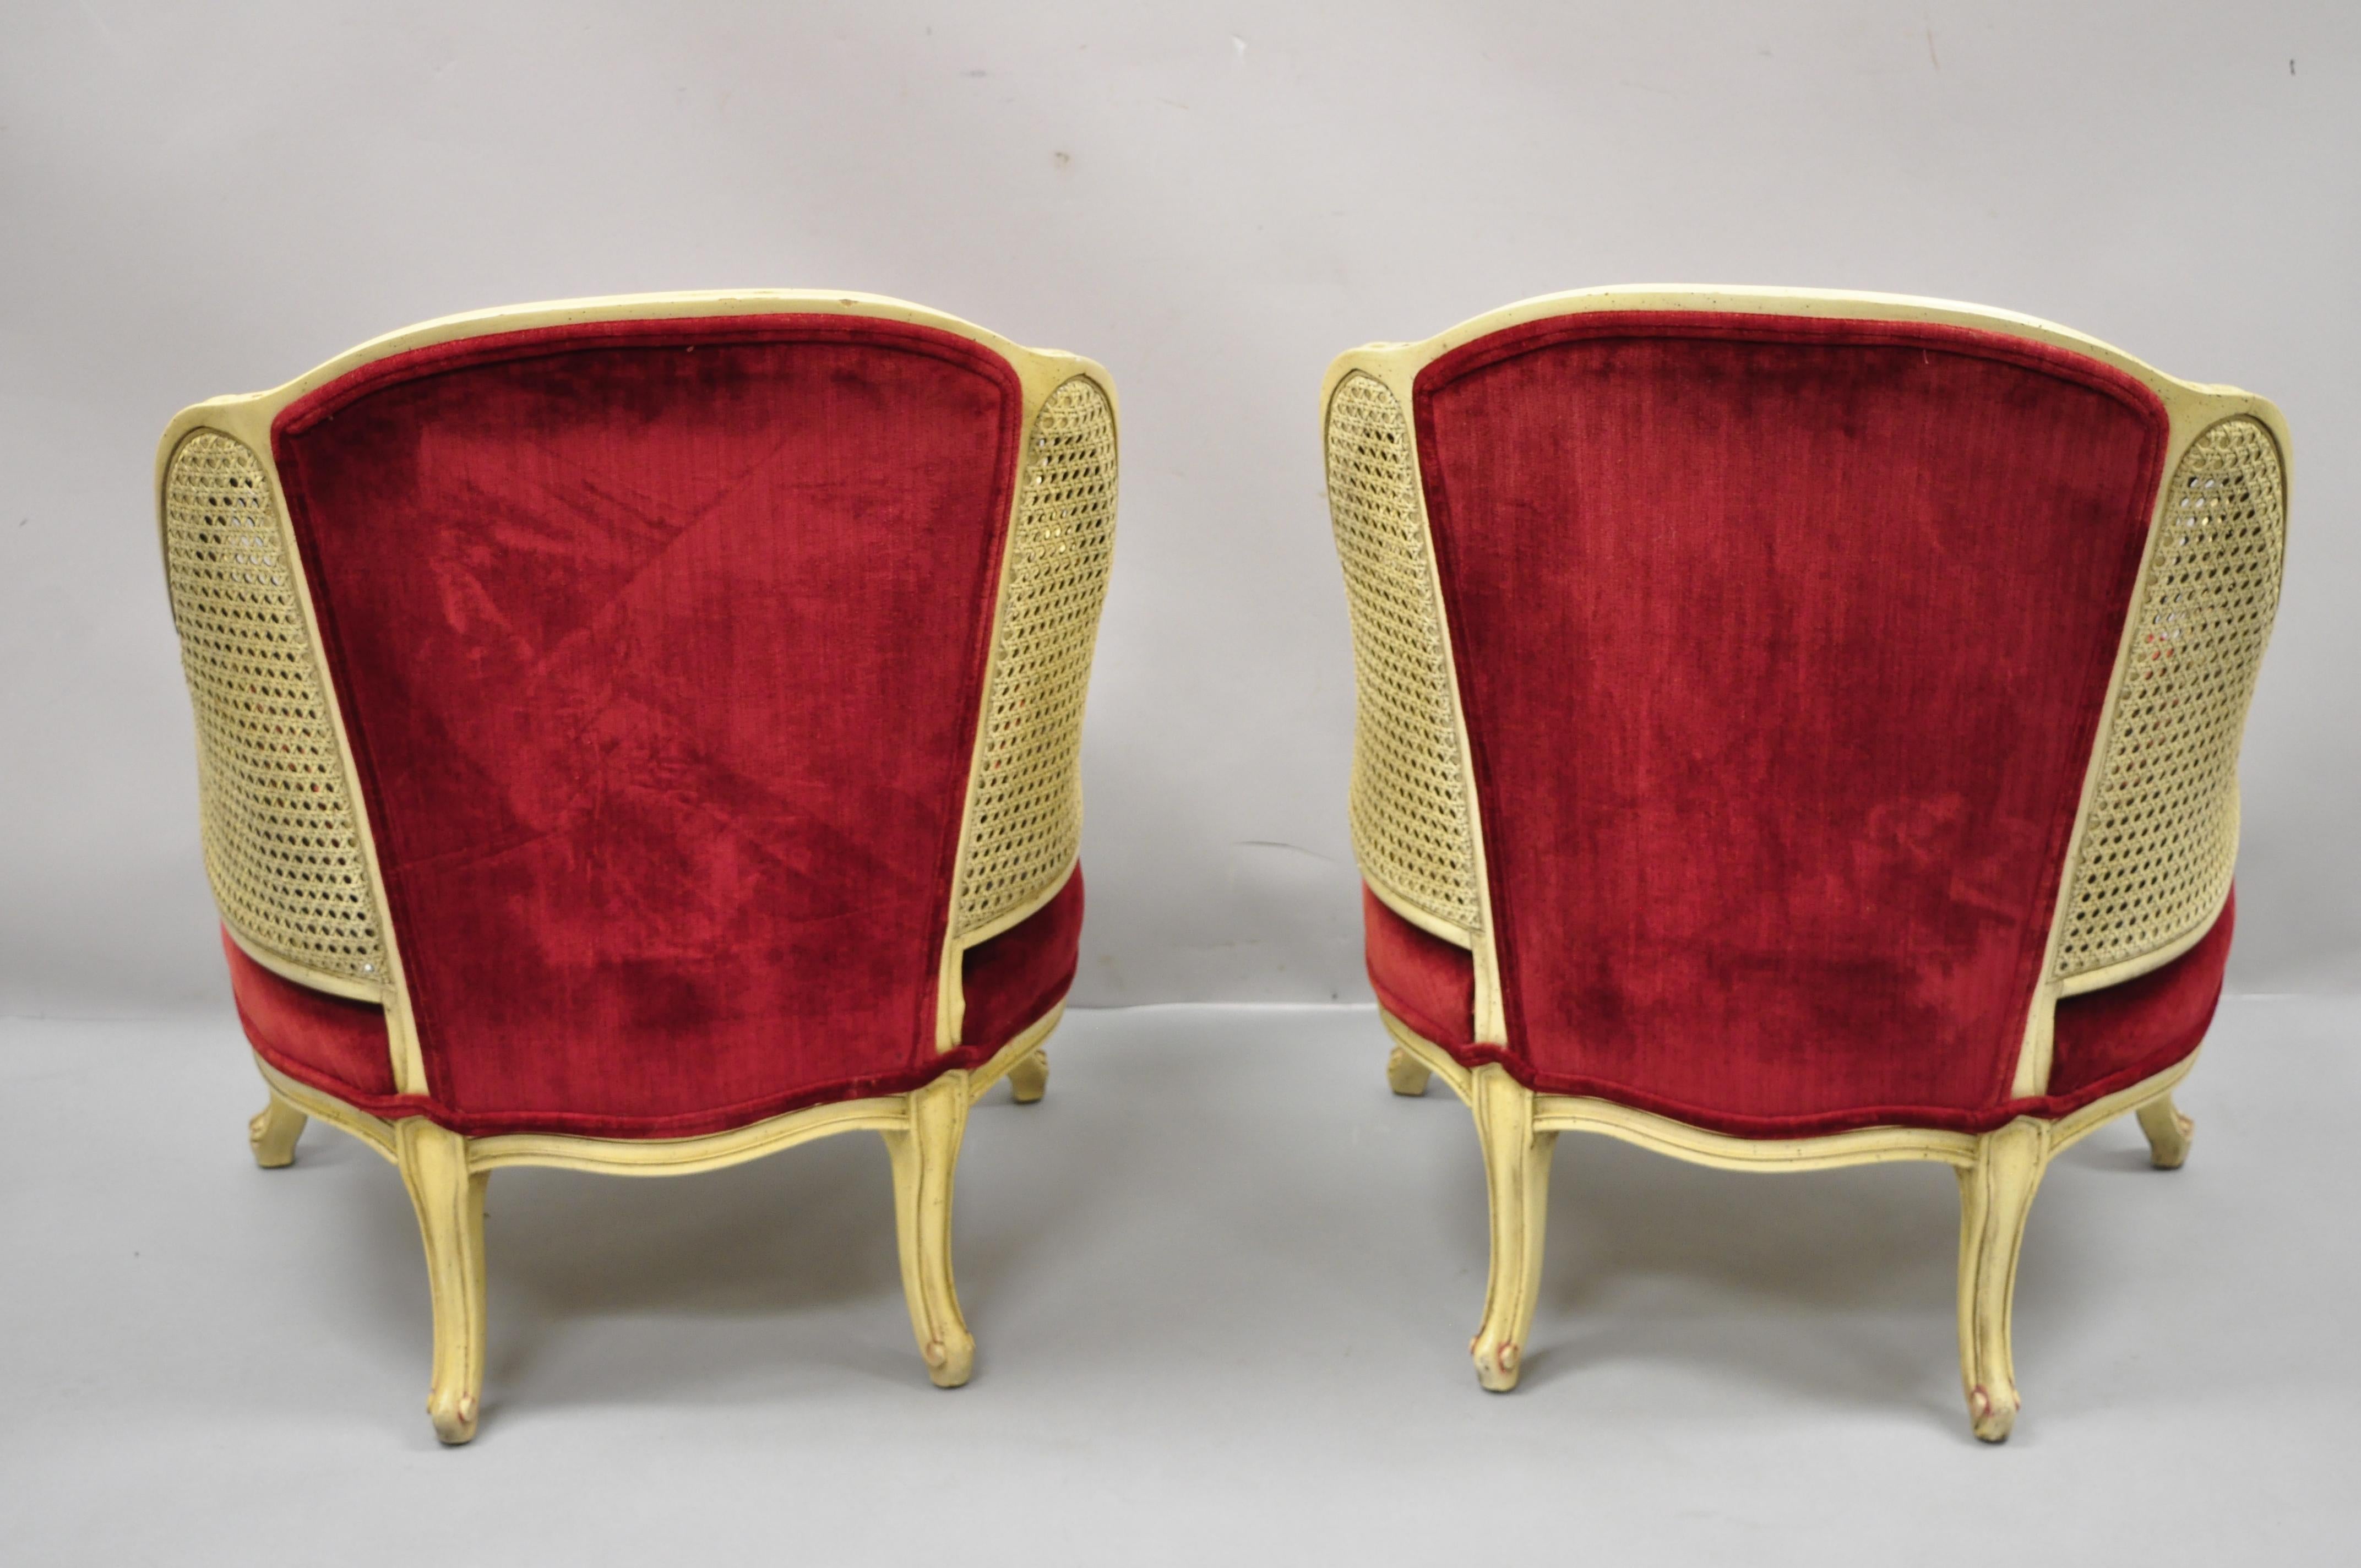 North American French Provincial Hollywood Regency Red Cane Bergere Club Arm Chairs, a Pair